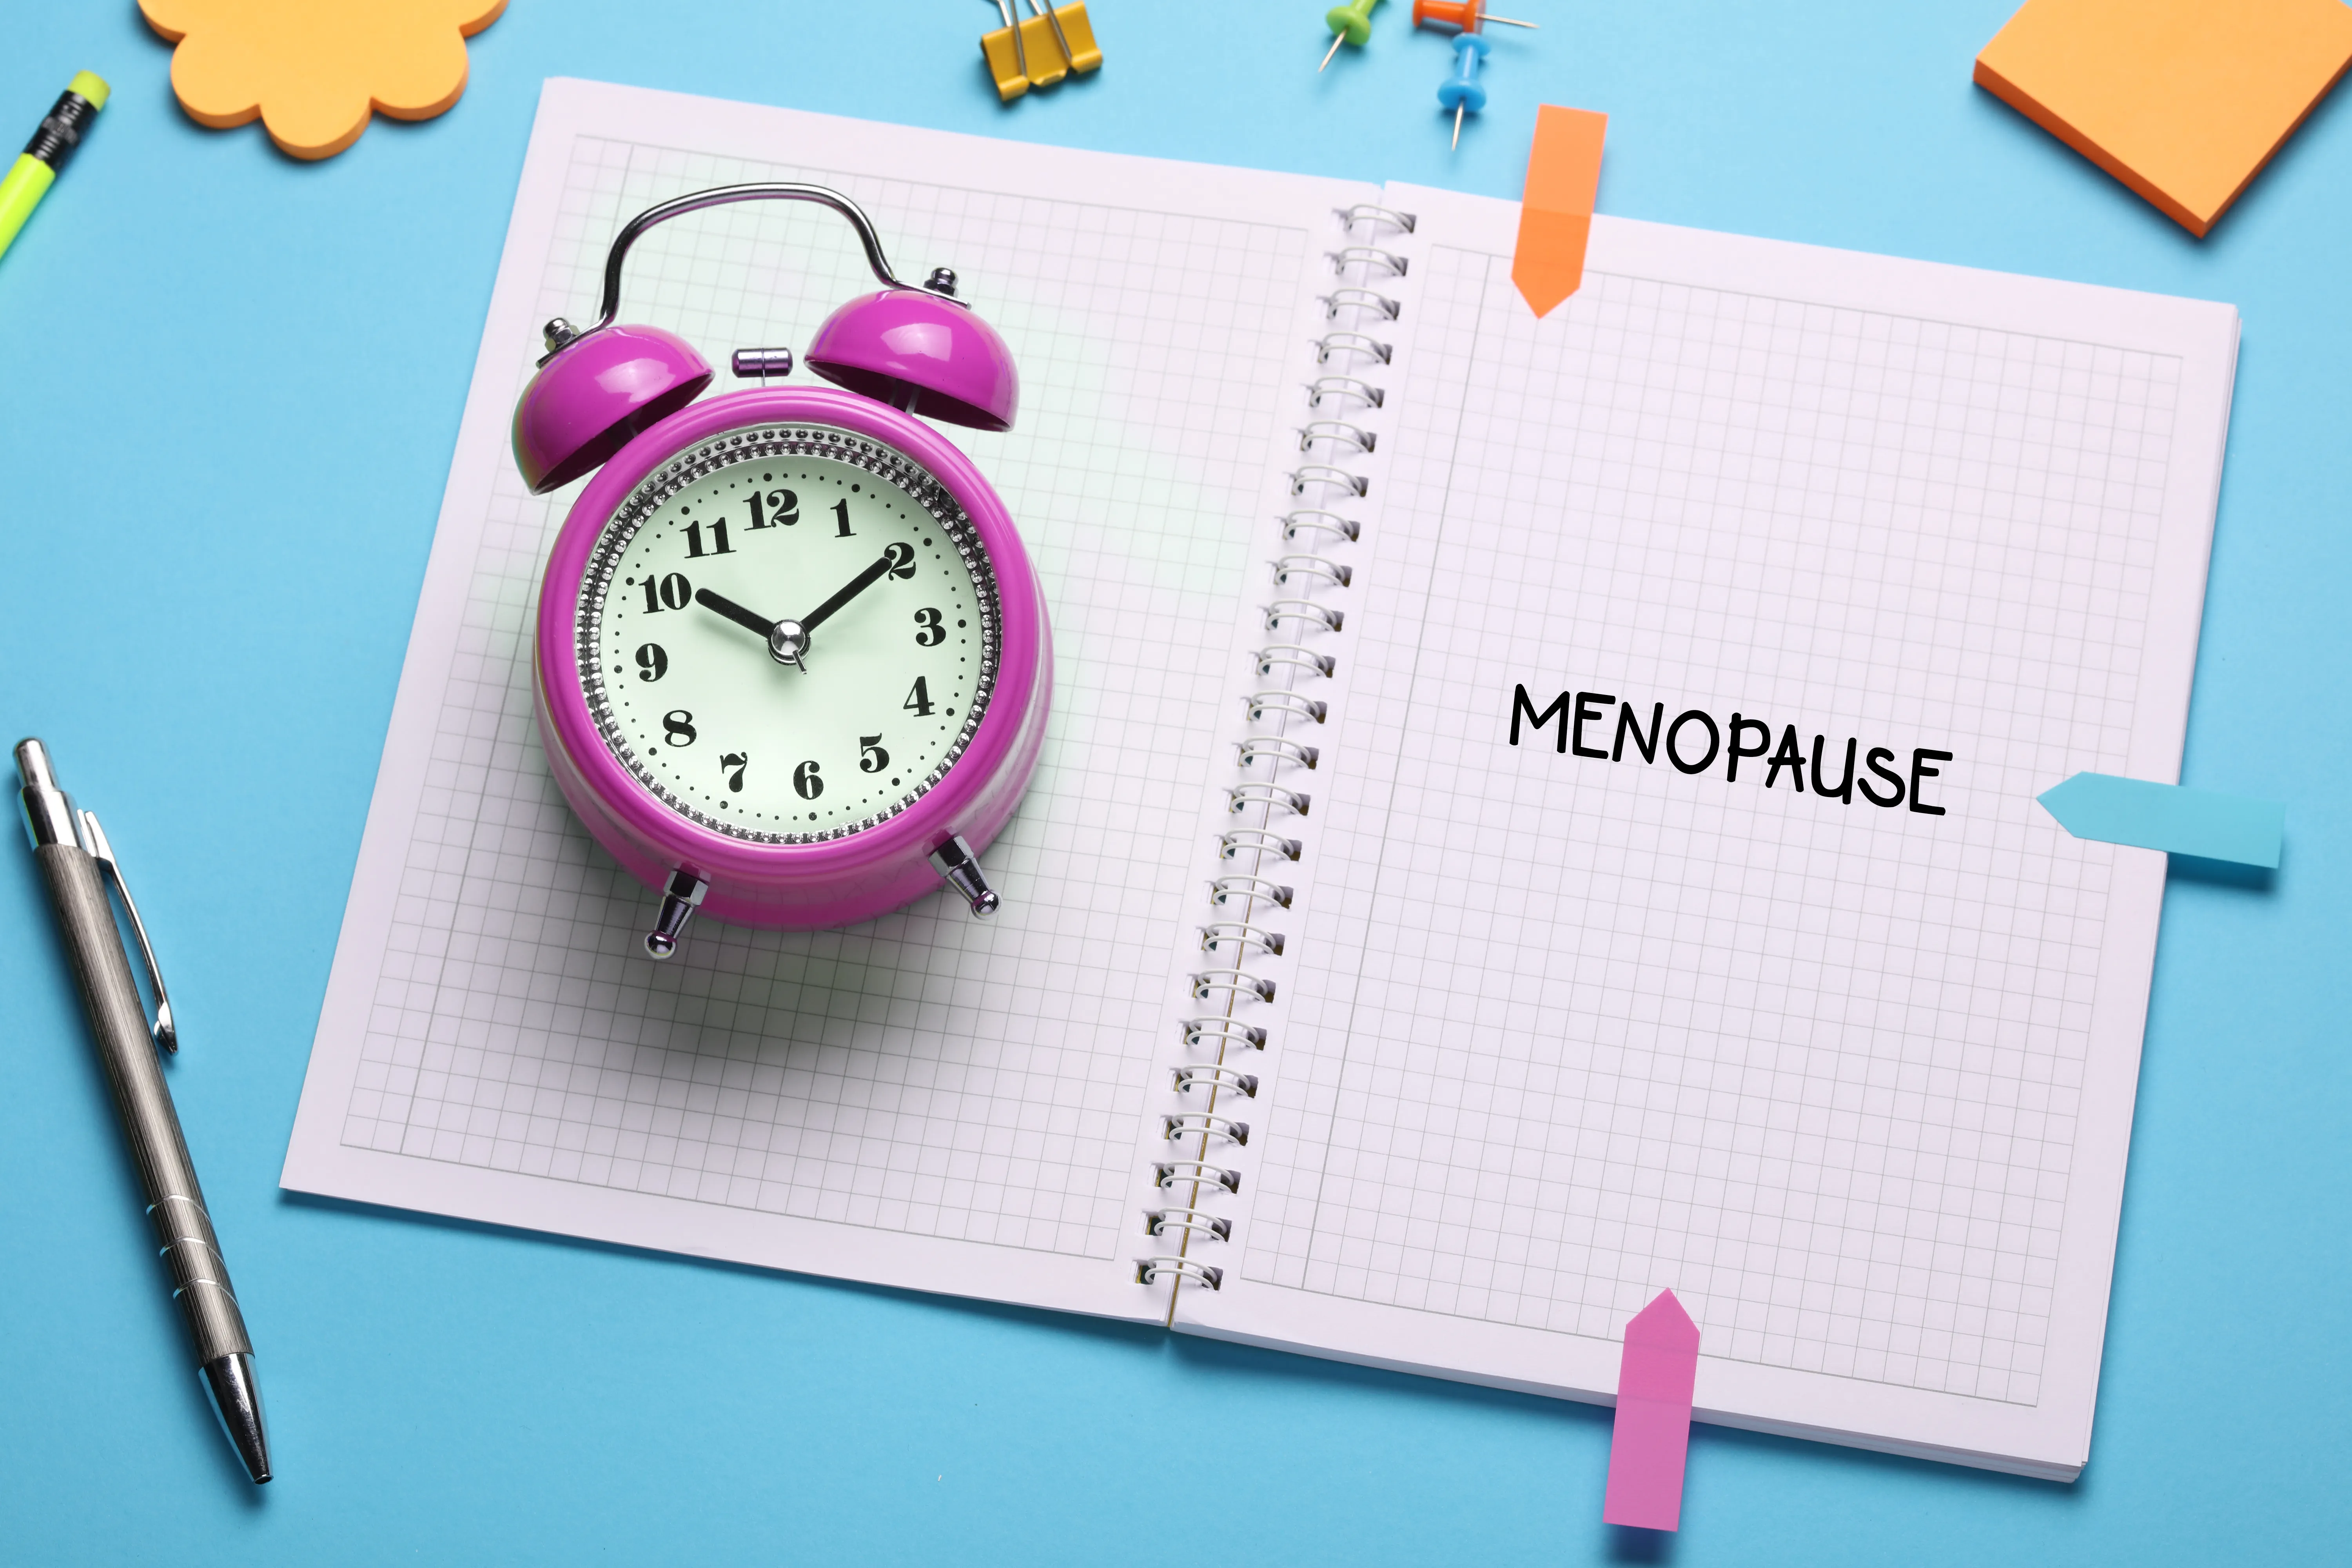 Menopause and Diabetes: What Women Need to Know